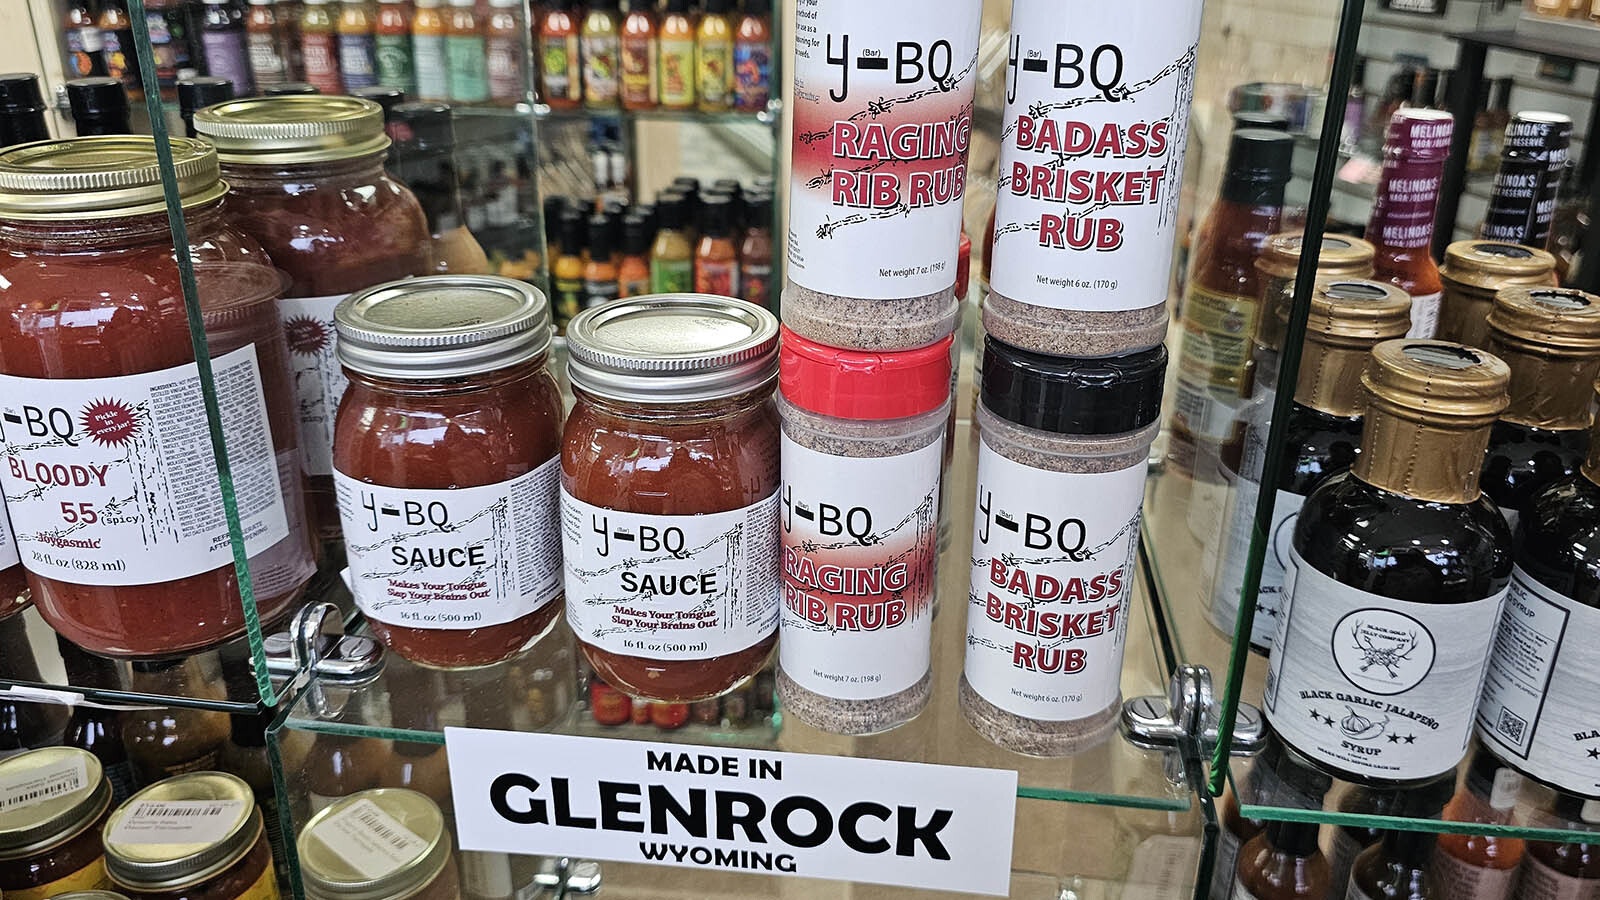 Spicy barbecue sauces made from Glenrock are a tasty addition to grilled meat, and are among Wyoming-made food products at Discover Thermopolis.